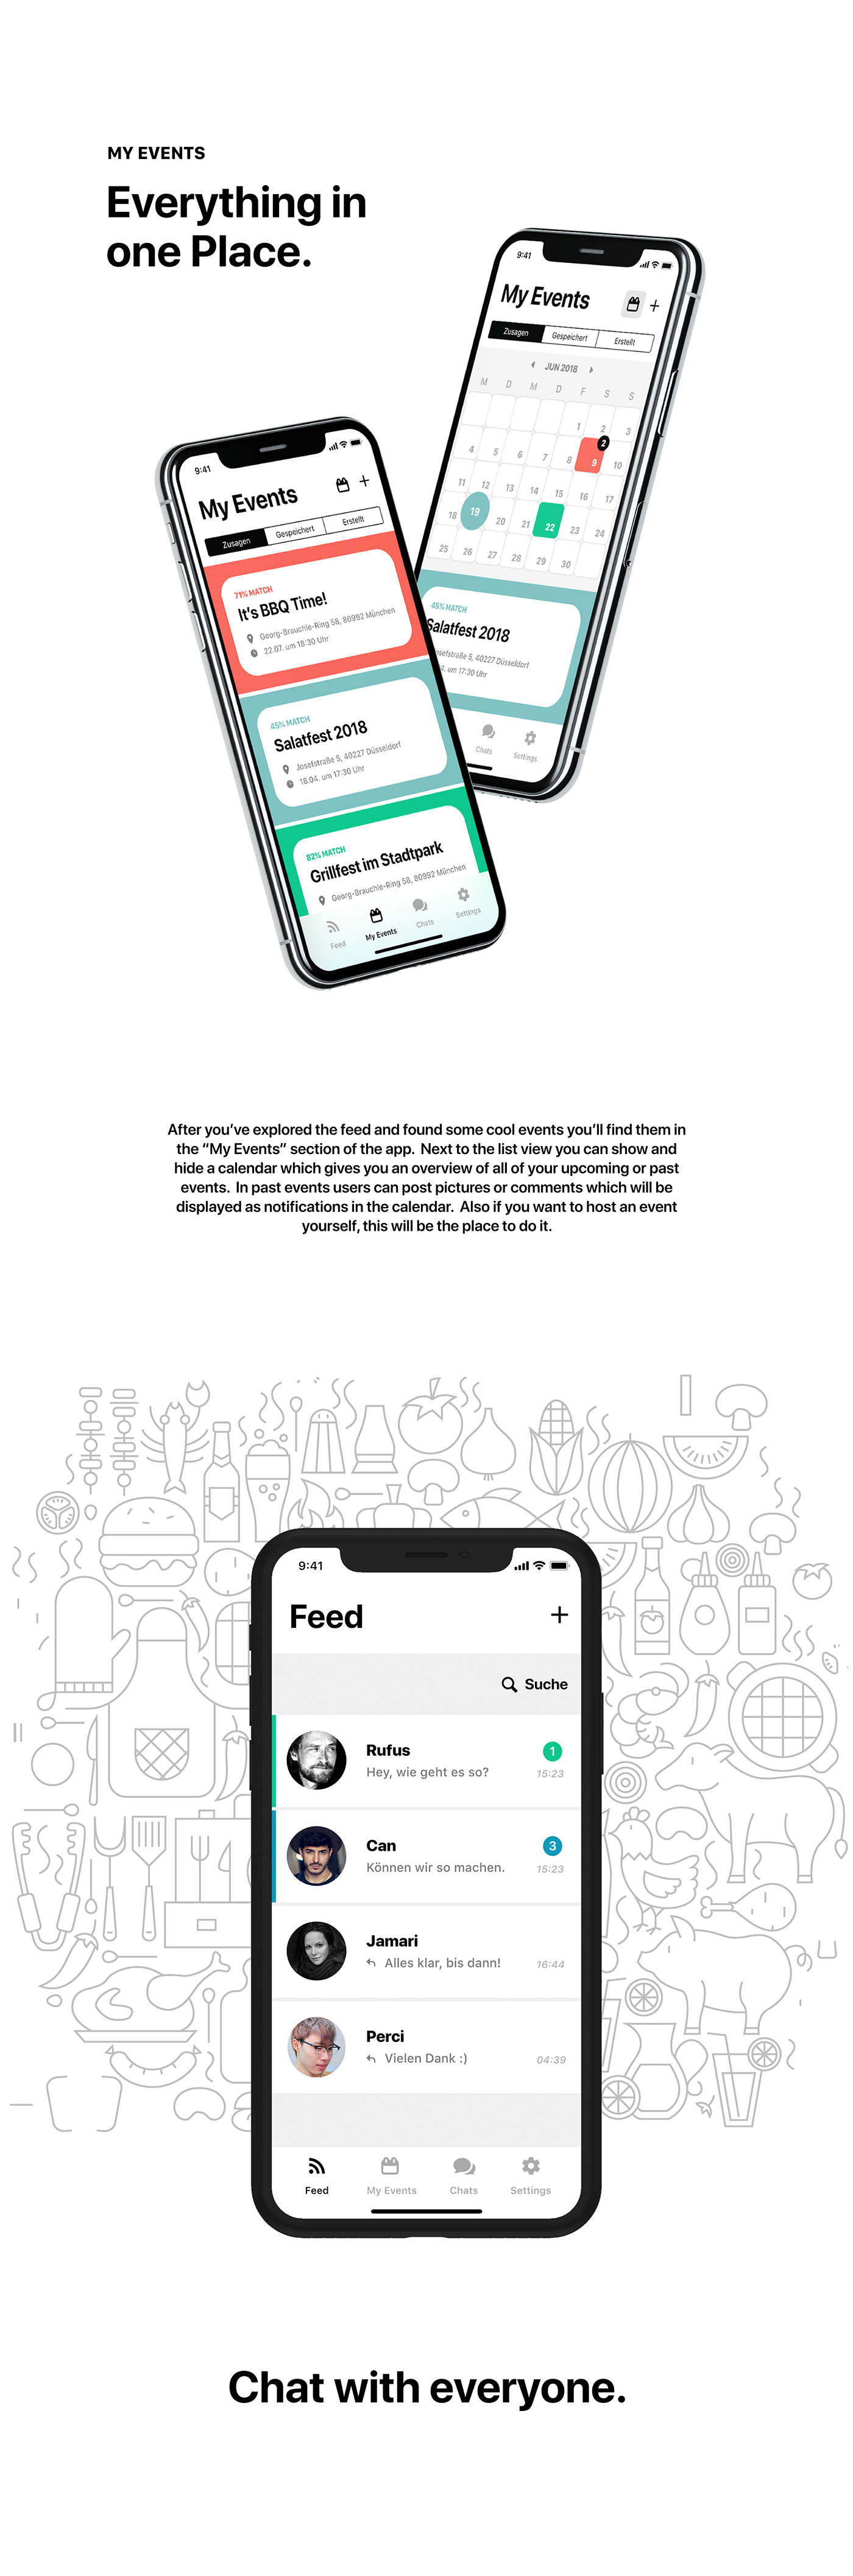 user interface iPhone x airbnb Events BBQ Adobe Live prototype user experience app design